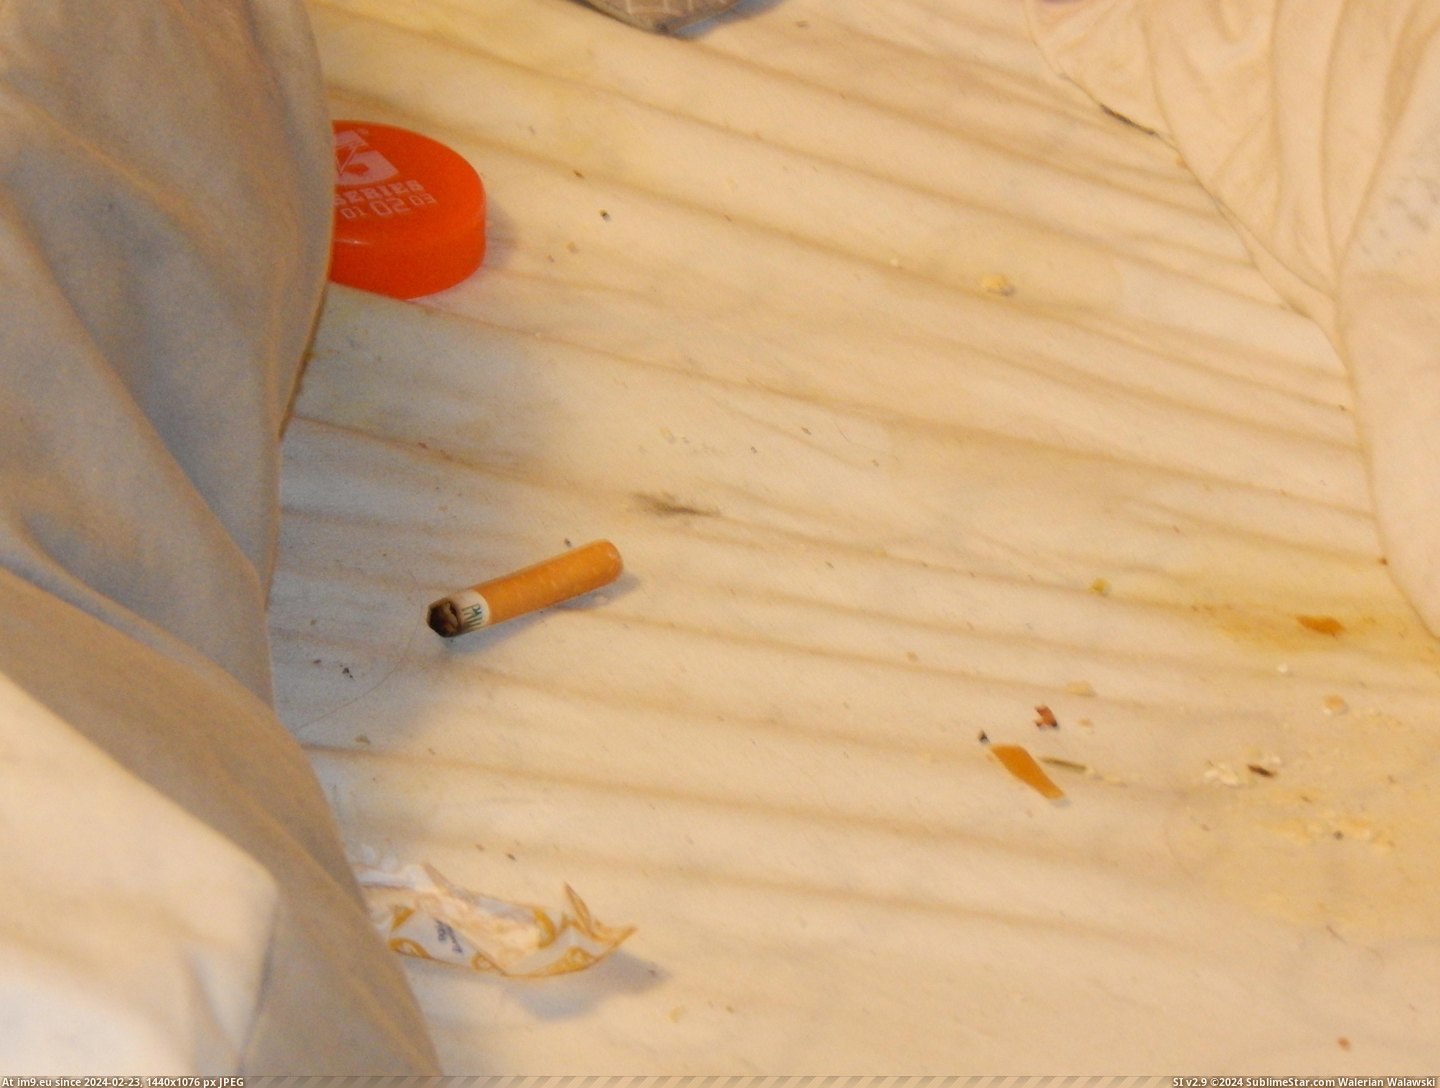 #Wtf #Was #Room #Checked #Worse #Cigs #Roommate #Smoking #Lying [Wtf] Roommate was lying about smoking cigs in her room, when we checked, what we found was definitely worse 5 Pic. (Obraz z album My r/WTF favs))